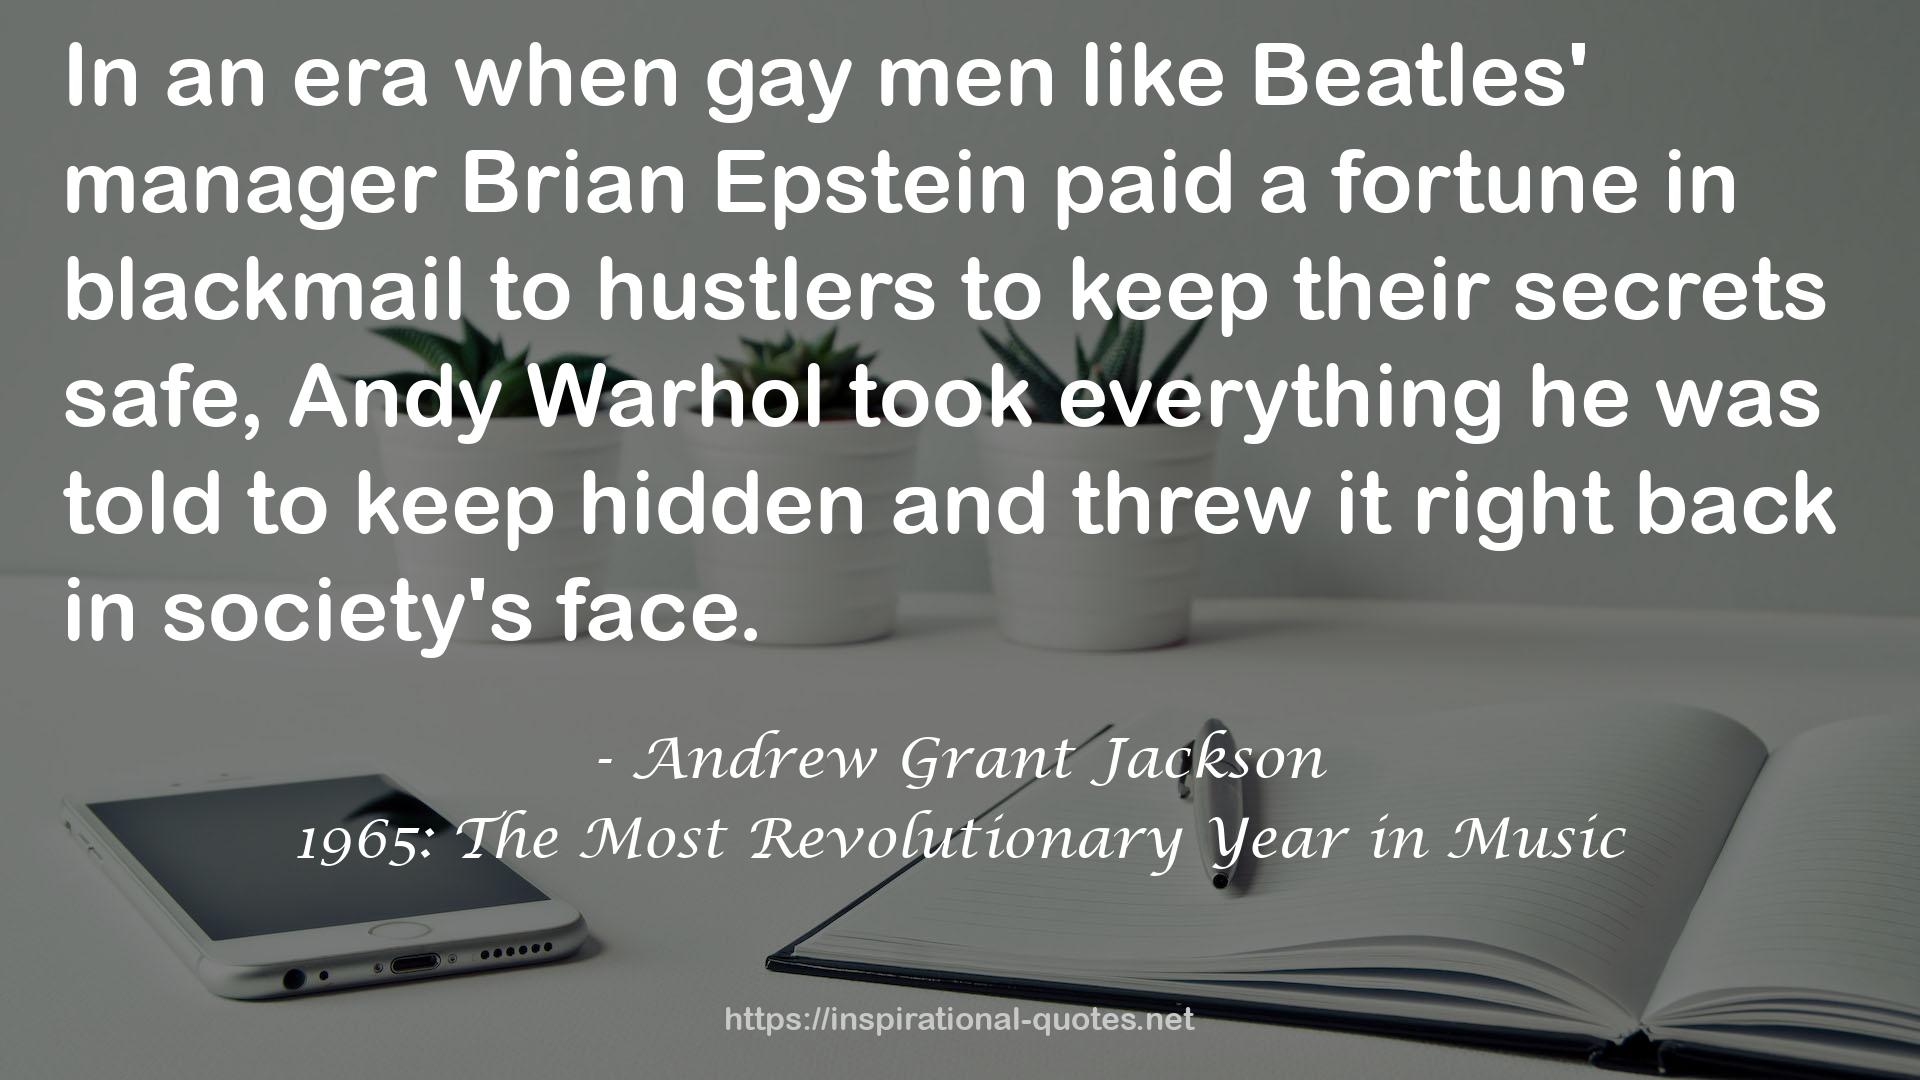 1965: The Most Revolutionary Year in Music QUOTES